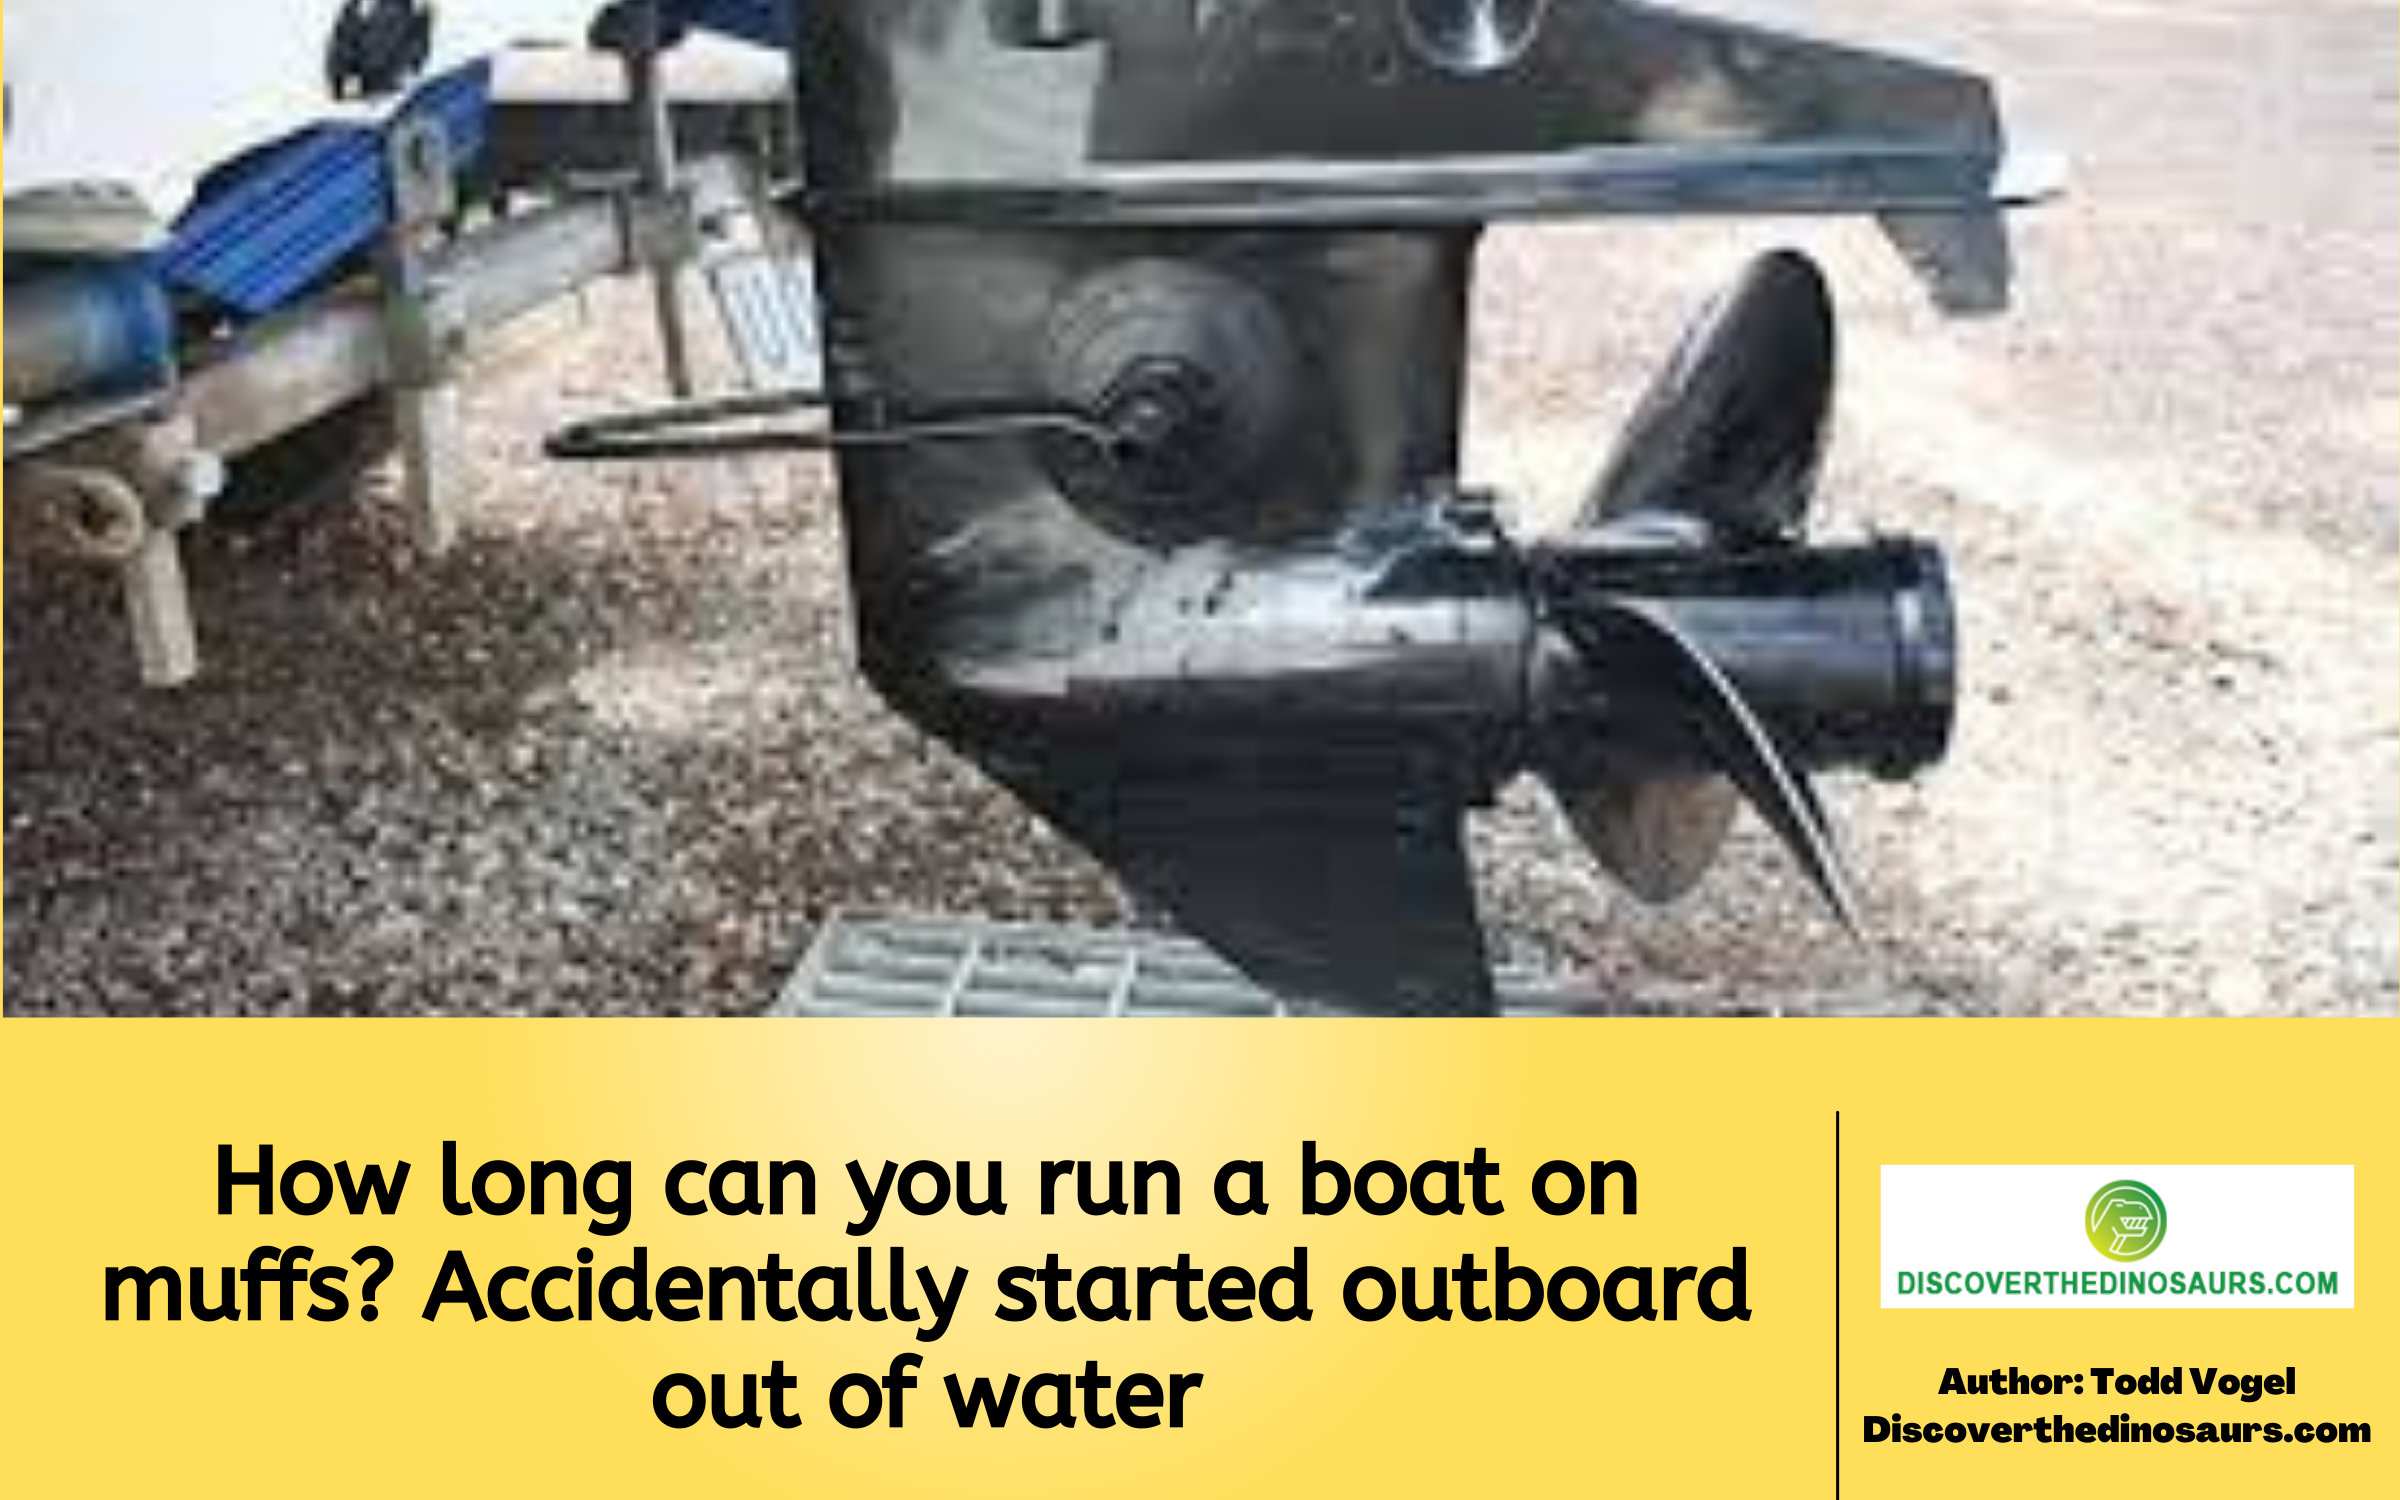 How long can you run a boat on muffs? Accidentally started outboard out of water